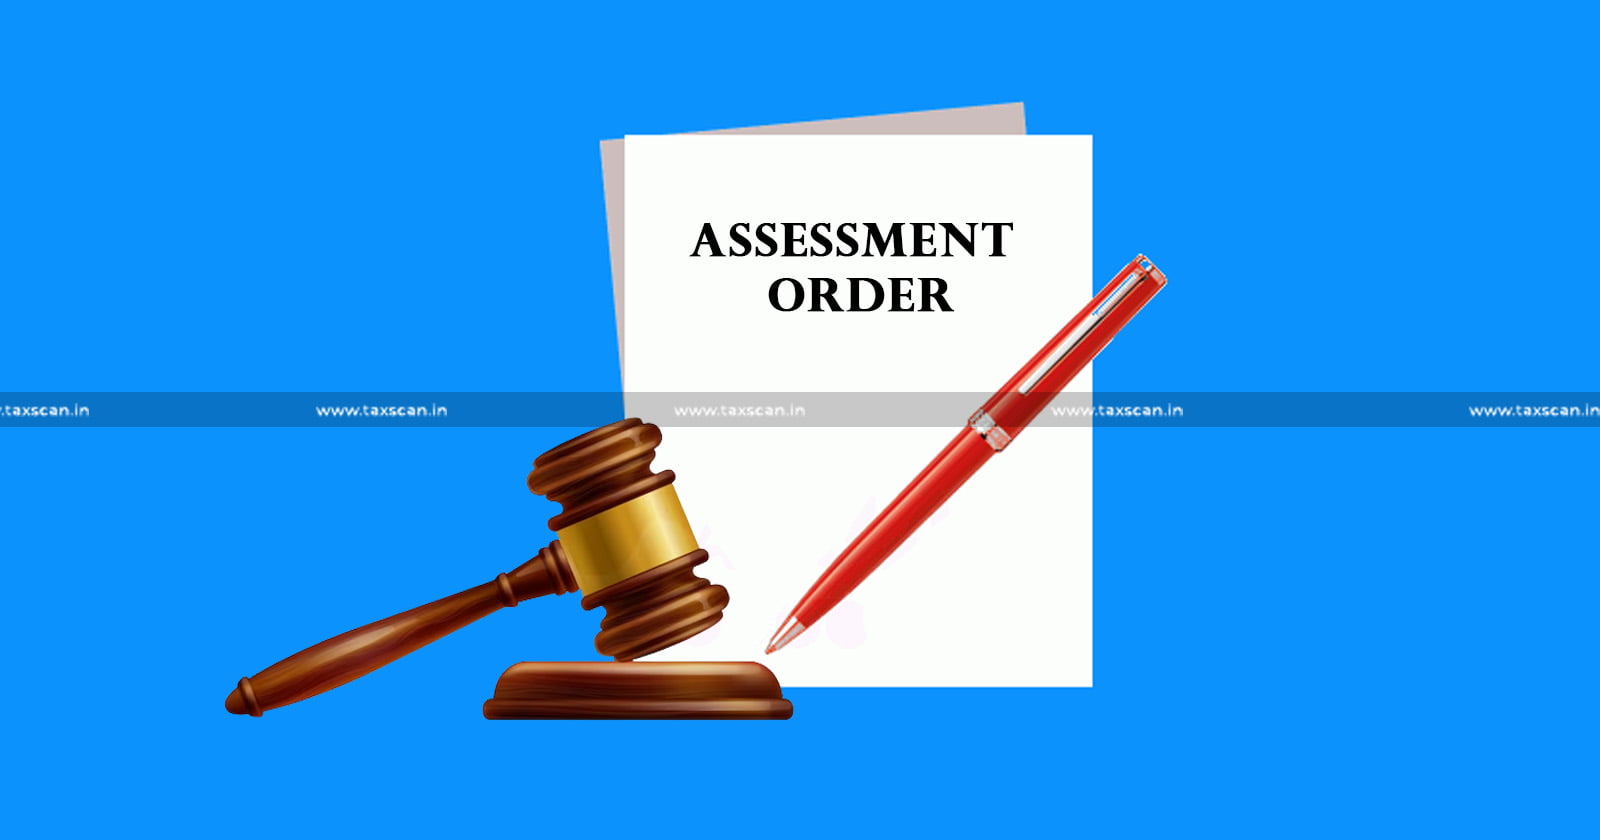 Issuance of Manual Final Assessment Order - Assessment Order - DIN - ITAT quashes Income Tax Scrutiny Assessment - Income Tax Scrutiny Assessment - Income Tax - Taxscan